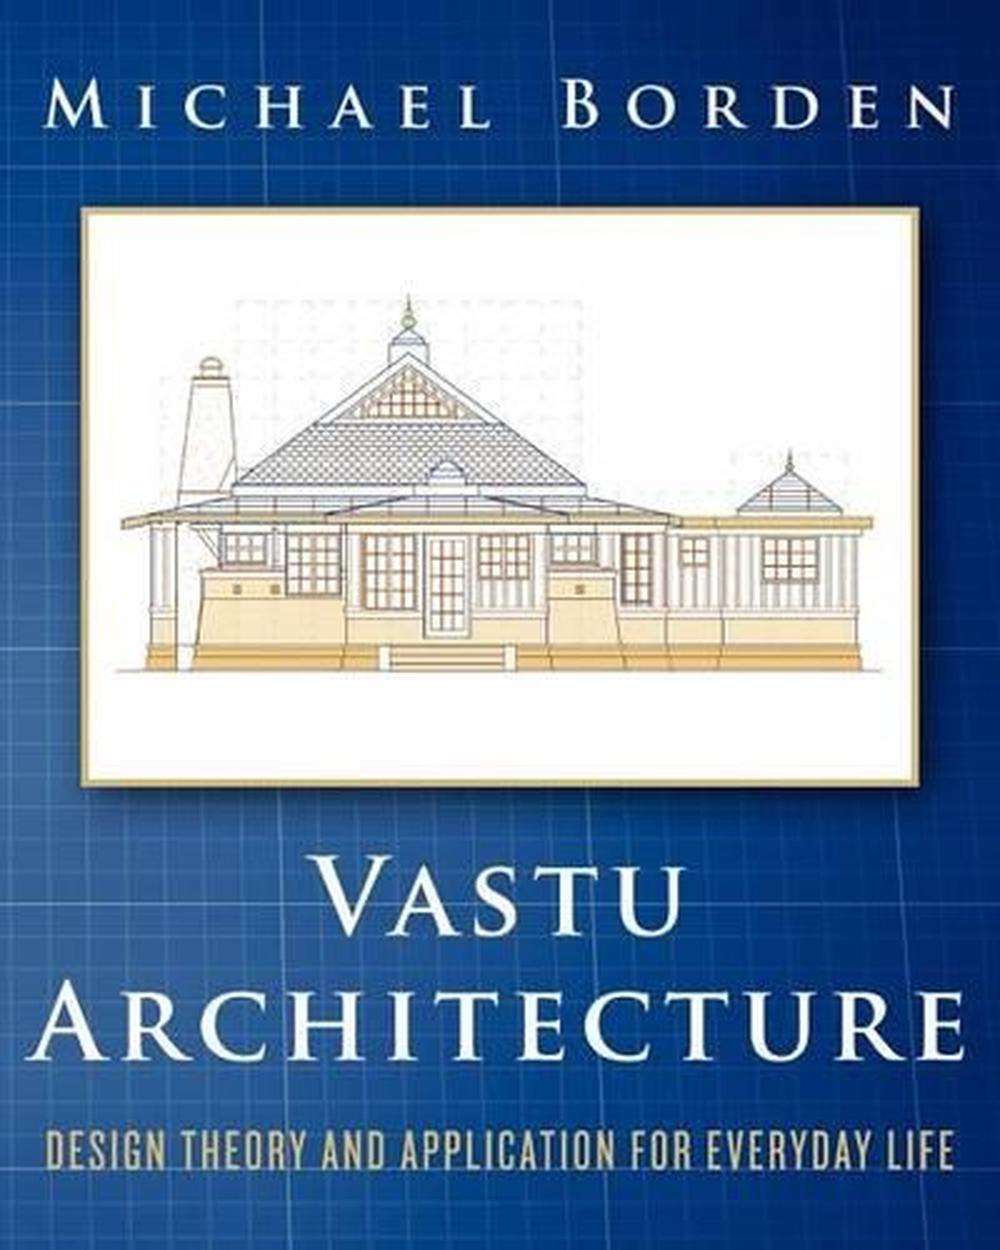 Vastu Architecture Design Theory and Application for Everyday Life by